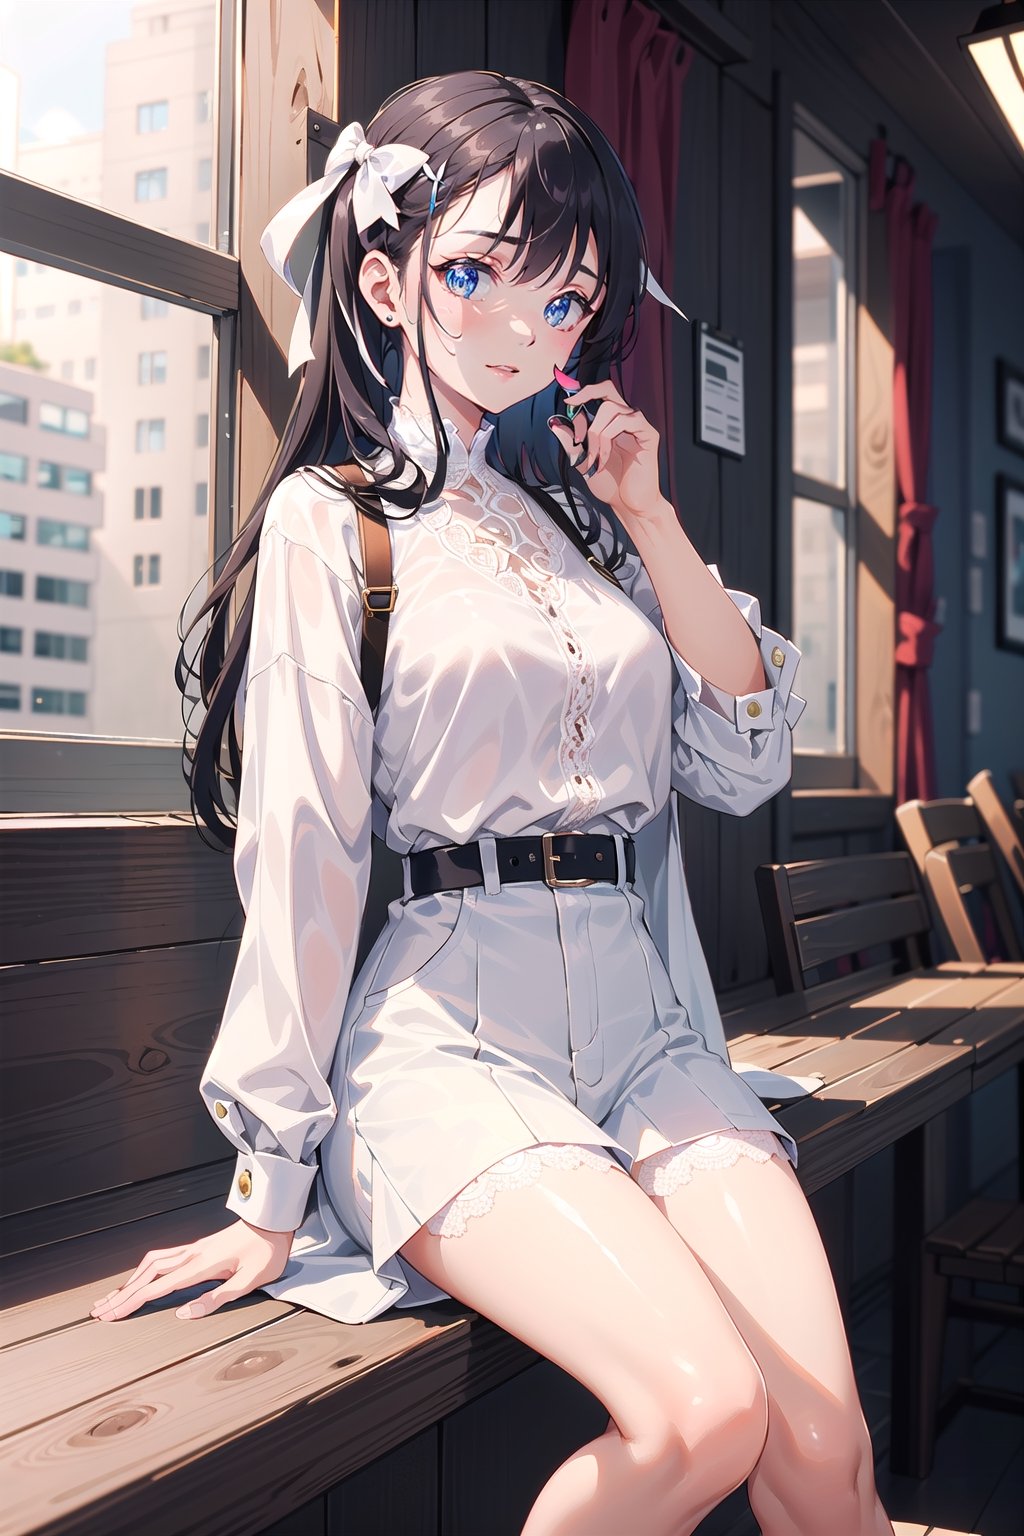 masterpiece, best quality, 1 girl, pose, perfect hands, modern outfit, detailed, sparkling, sitting, lace detail, long hair, ultra detailed, ultra detailed face, clear eyes, good lighting,, perfect anatomy, stylish white outfit, different hairstyles, hair ribbons, front view, (perfect hands), indoors